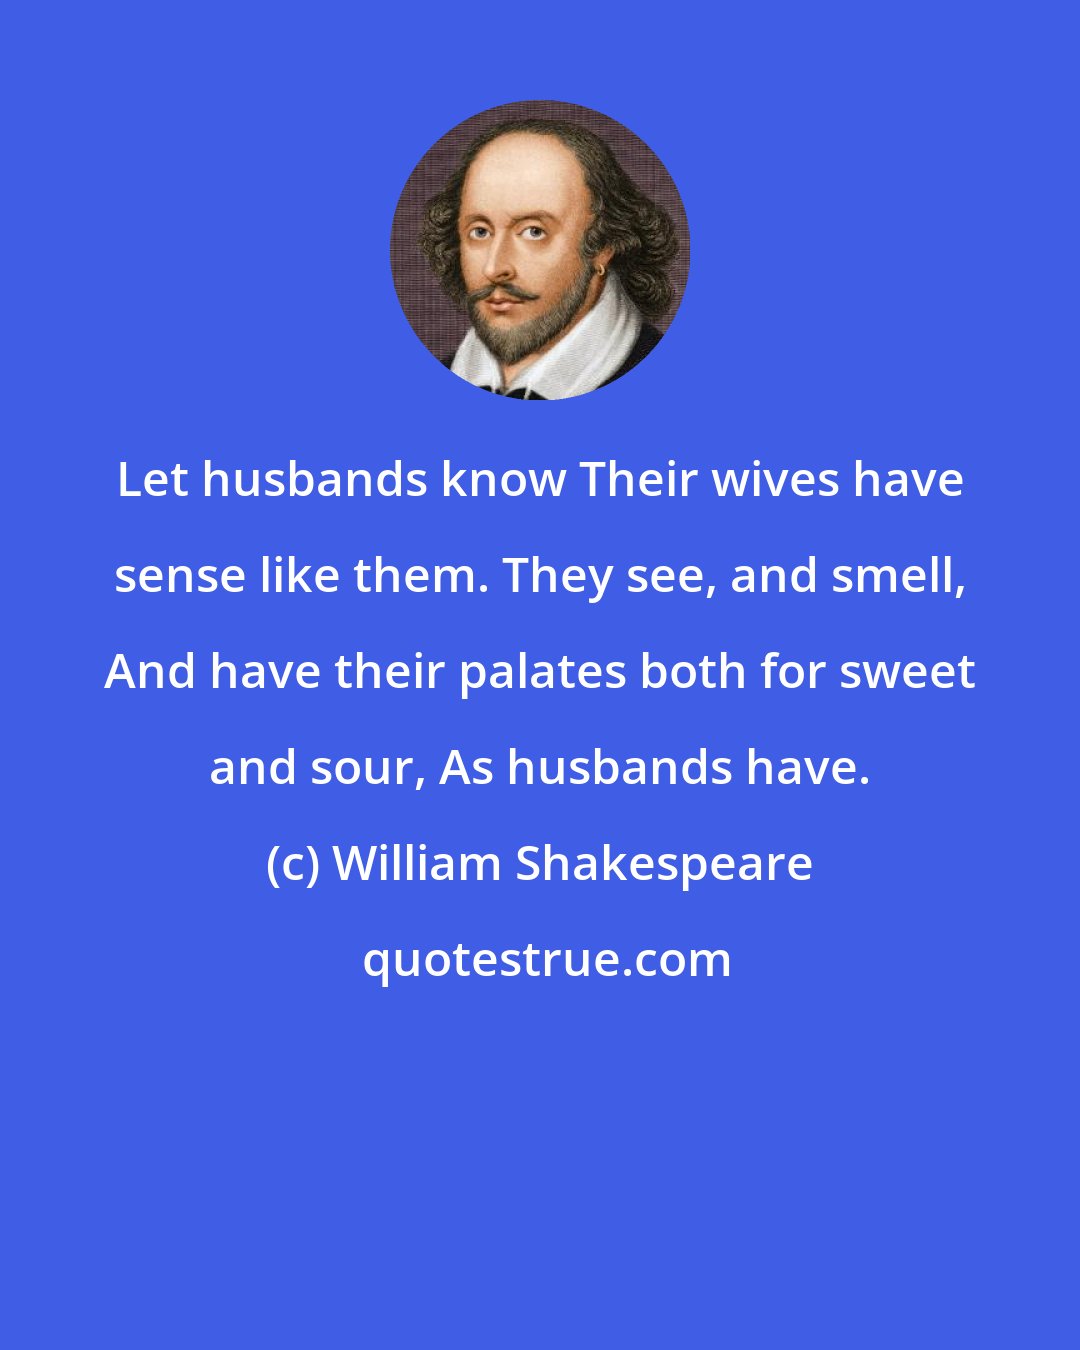 William Shakespeare: Let husbands know Their wives have sense like them. They see, and smell, And have their palates both for sweet and sour, As husbands have.